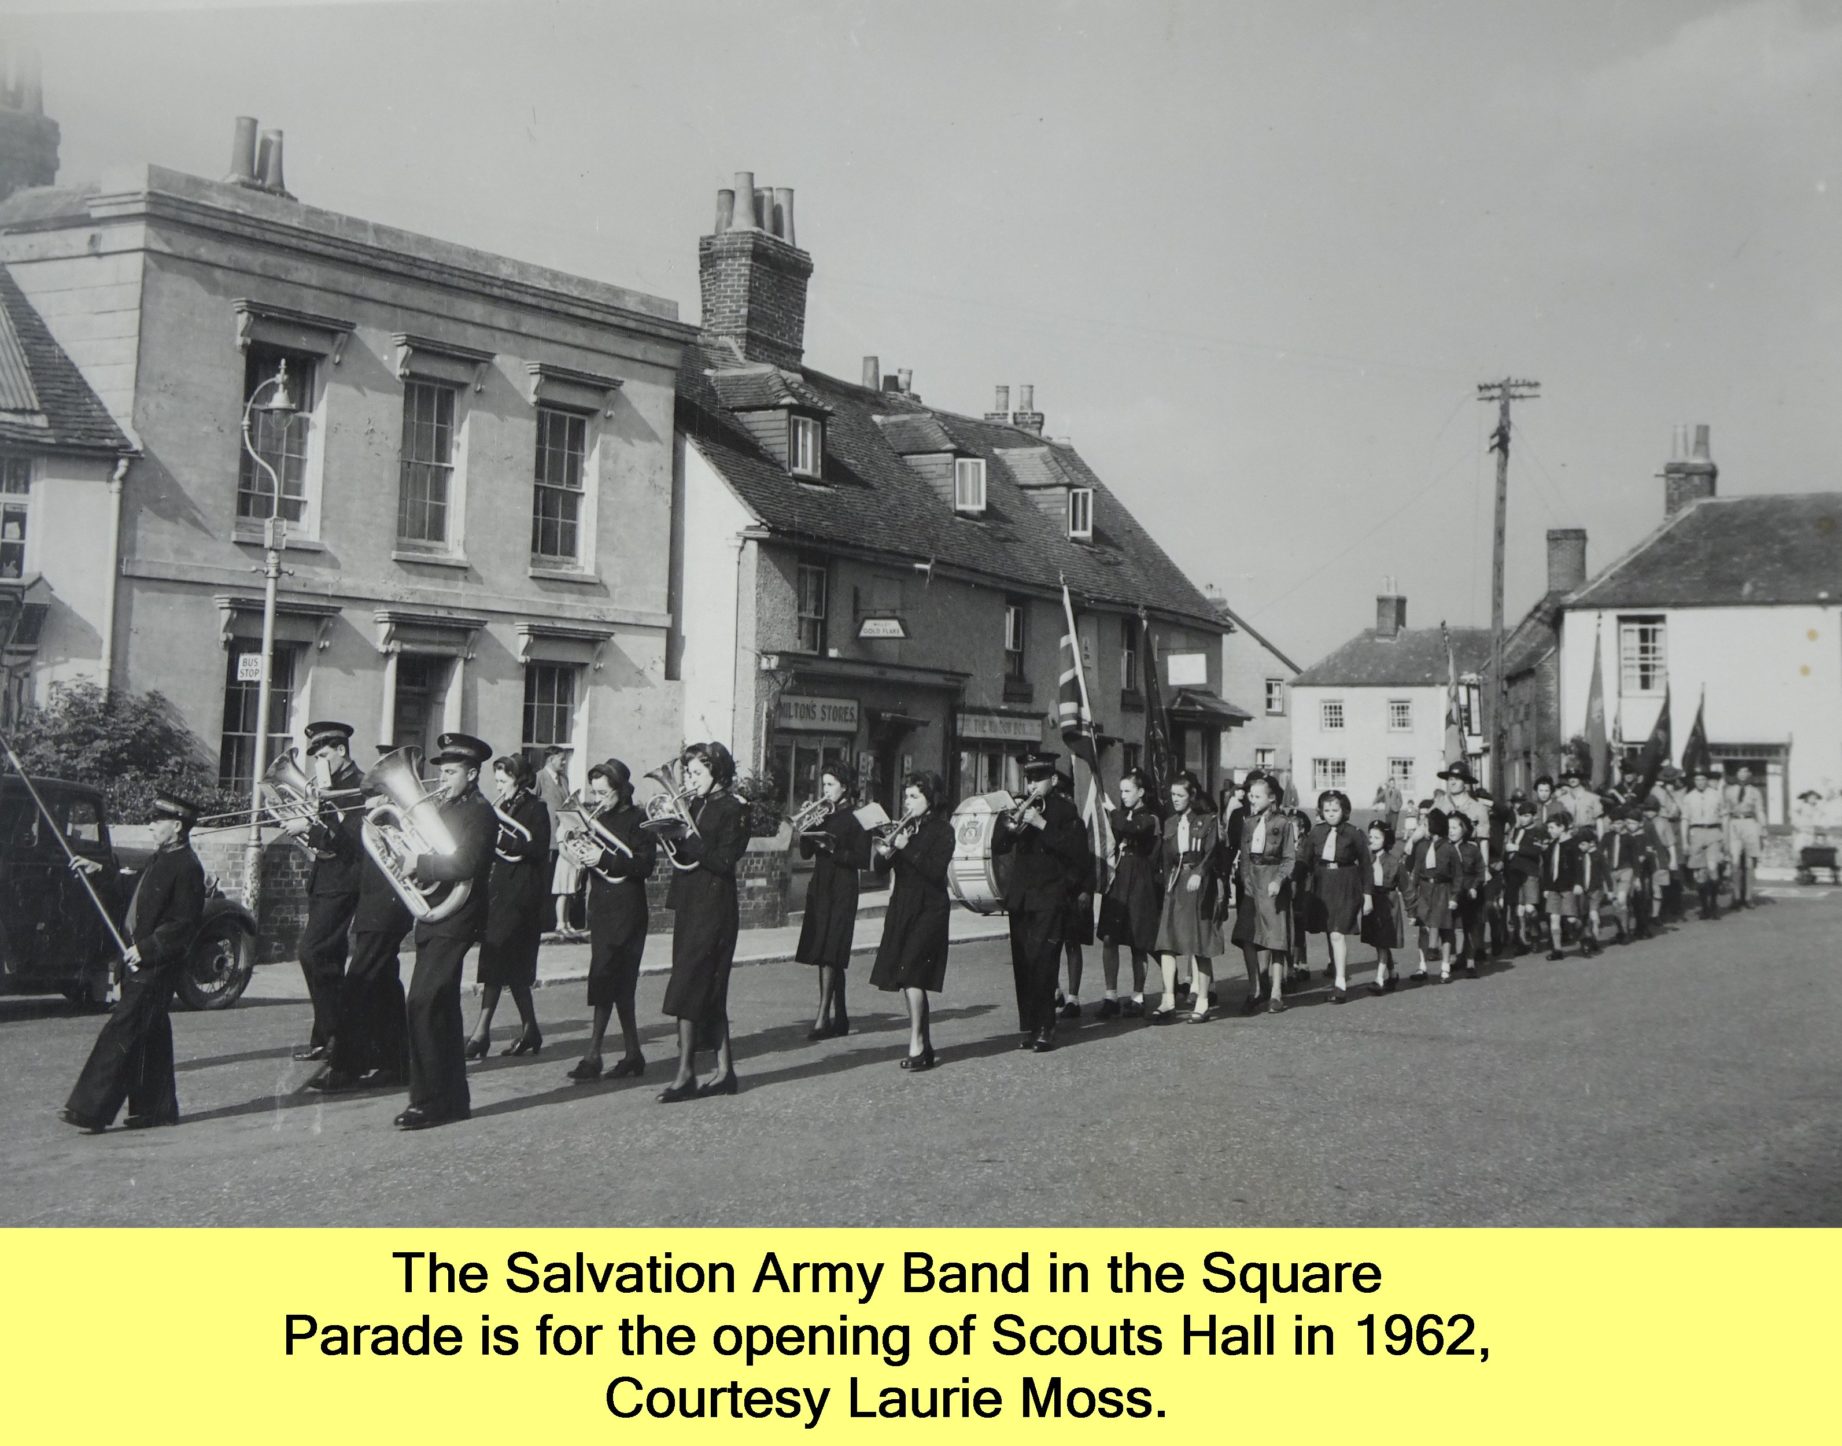 WESTBOURNE HISTORY PHOTO, SALVATION ARMY, BAND, SQUARE, SCOUTS, 1962